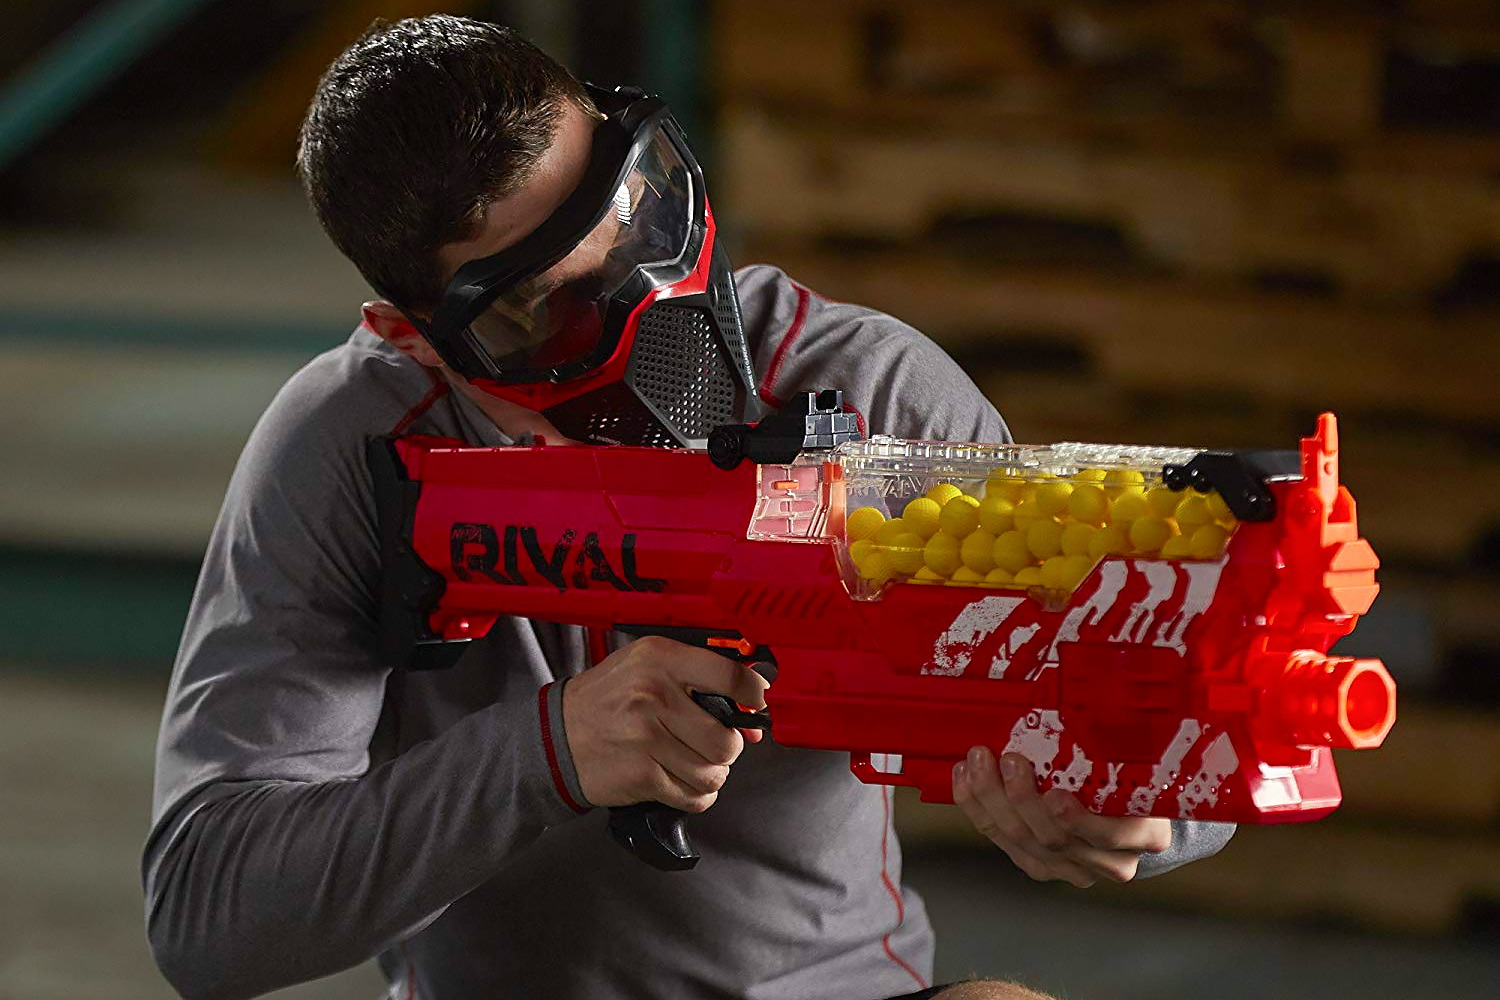 Purchase Fascinating nerf sniper gun at Cheap Prices 